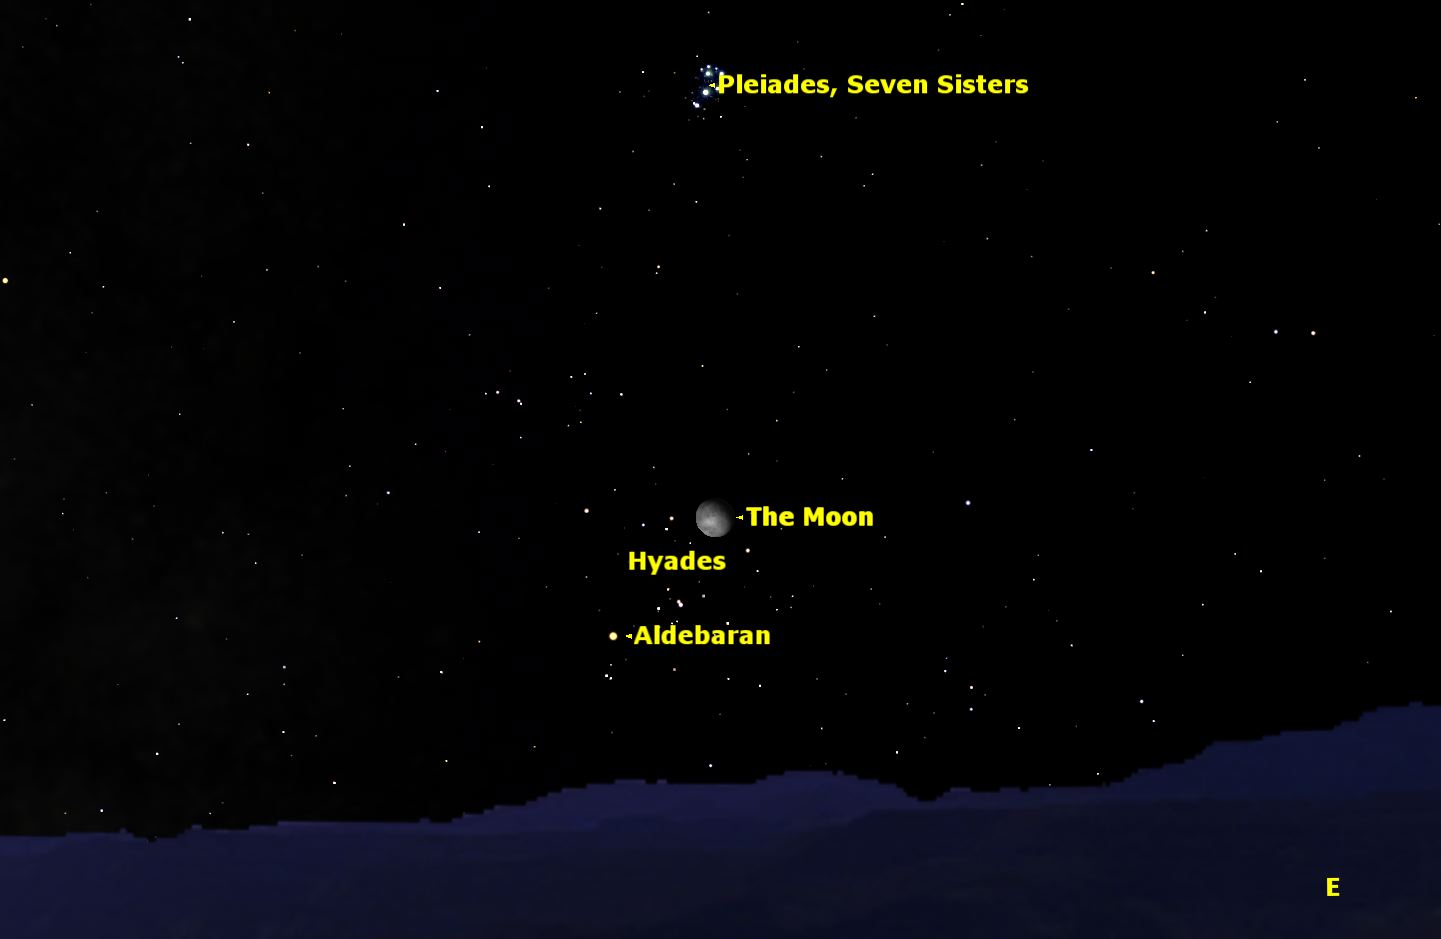 Look eastward around 10 p.m. on Saturday, October 11, to see the waning gibbous moon framed by the Pleiades star cluster above and the bright red giant star Aldebaran below. Credit: Starry Night Software.